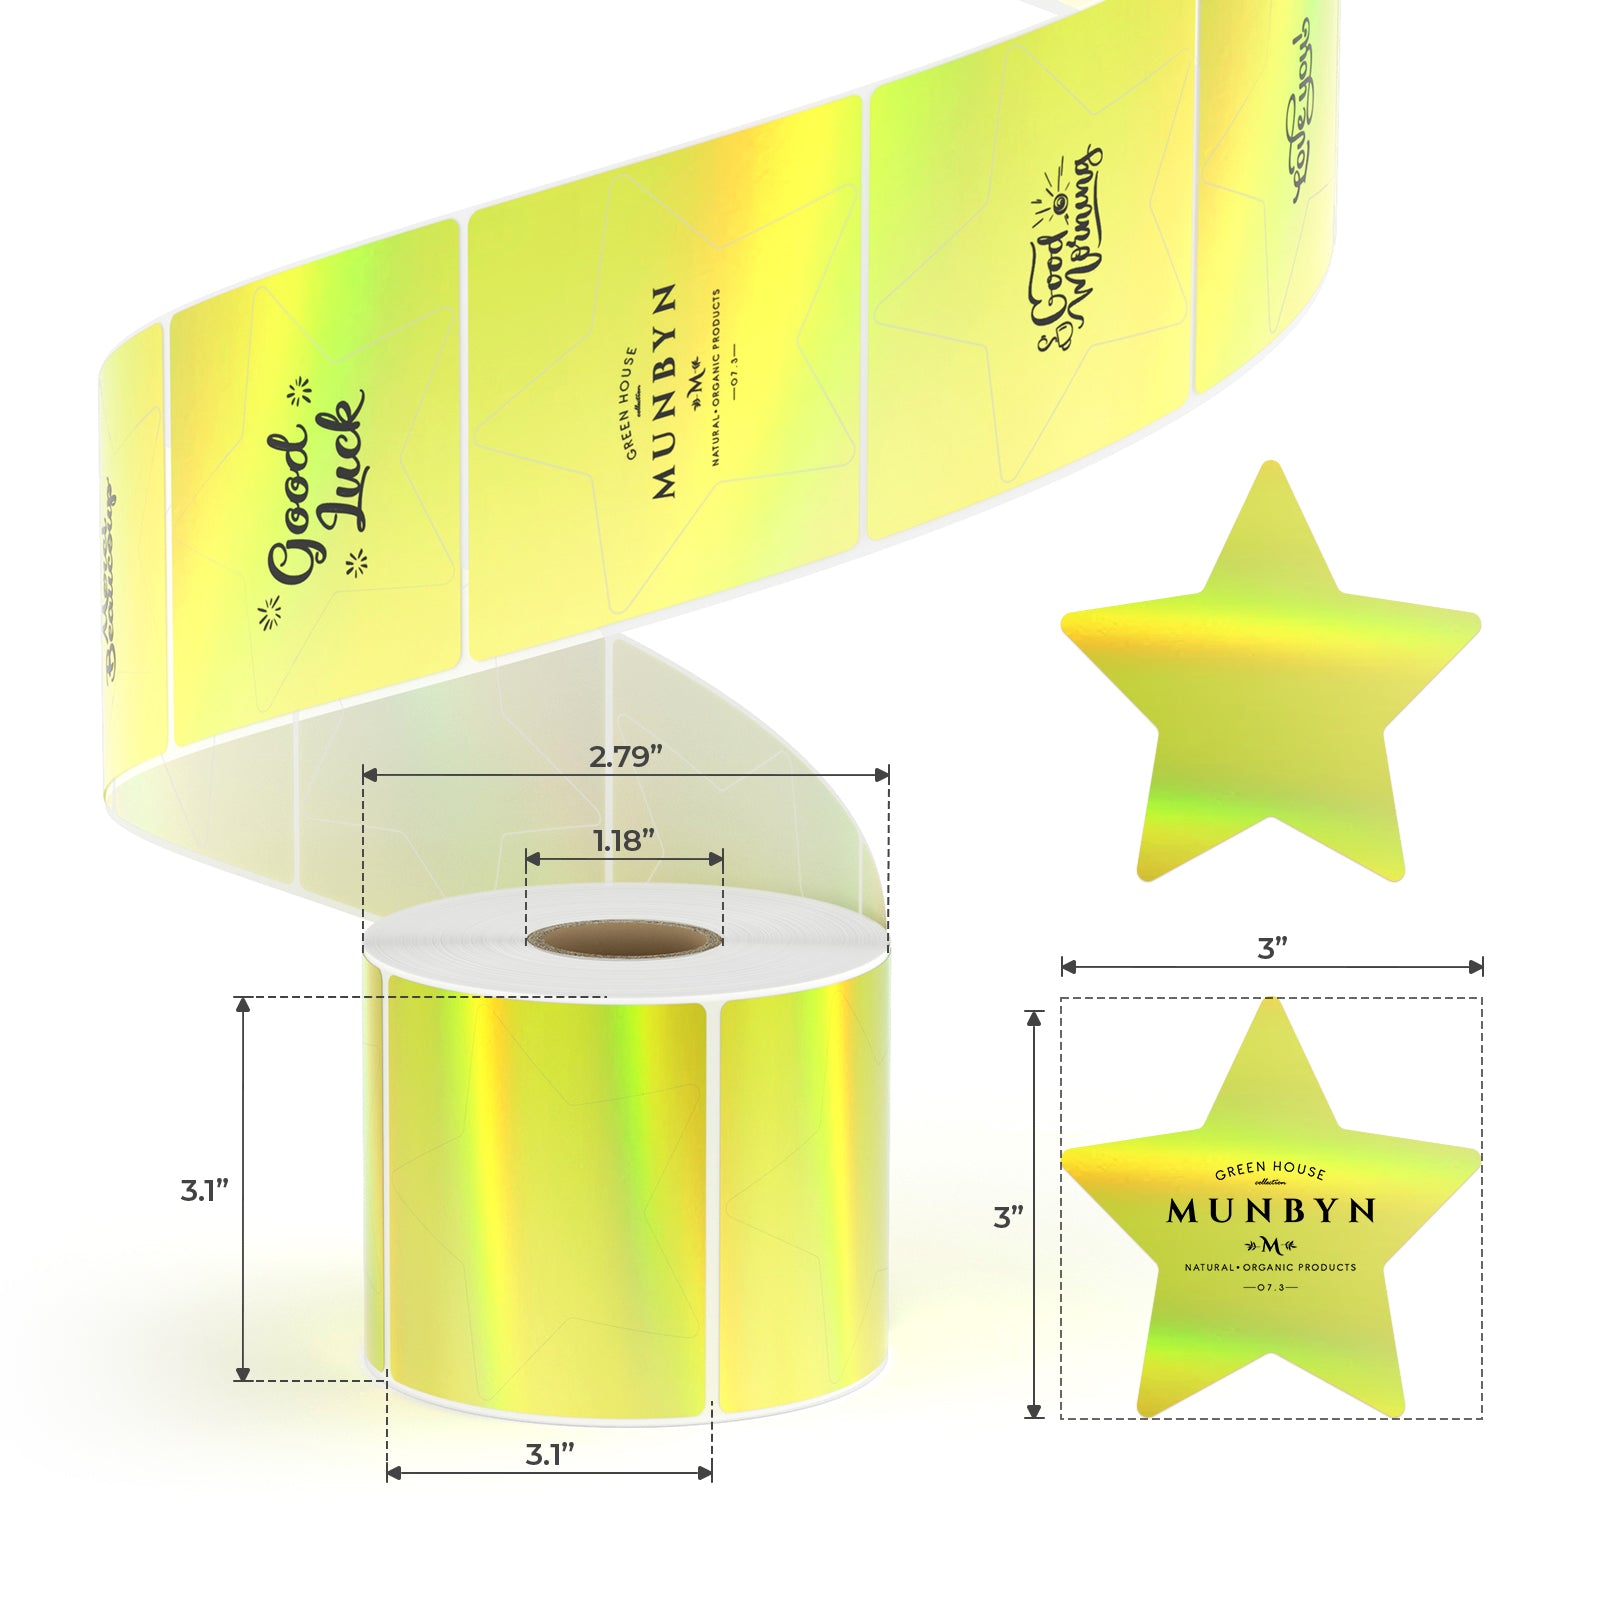 MUNBYN's versatile gold holographic star-shaped thermal labels measure 3